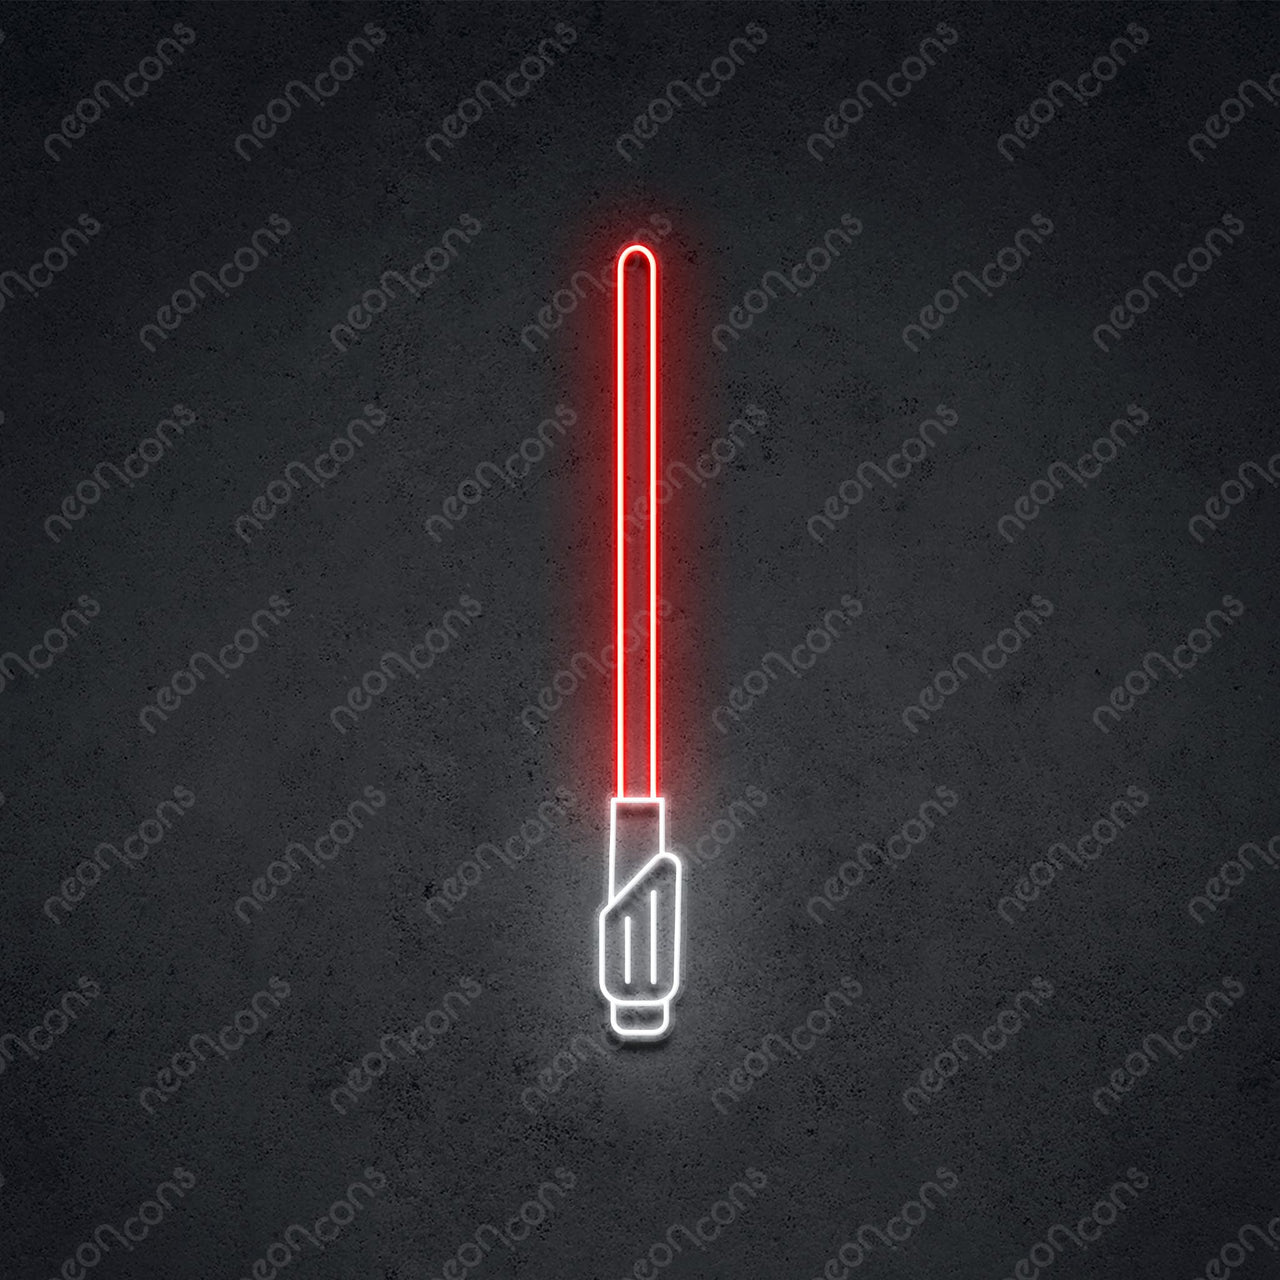 "Space Sword" Neon Sign 60cm (2ft) / Red / LED Neon by Neon Icons